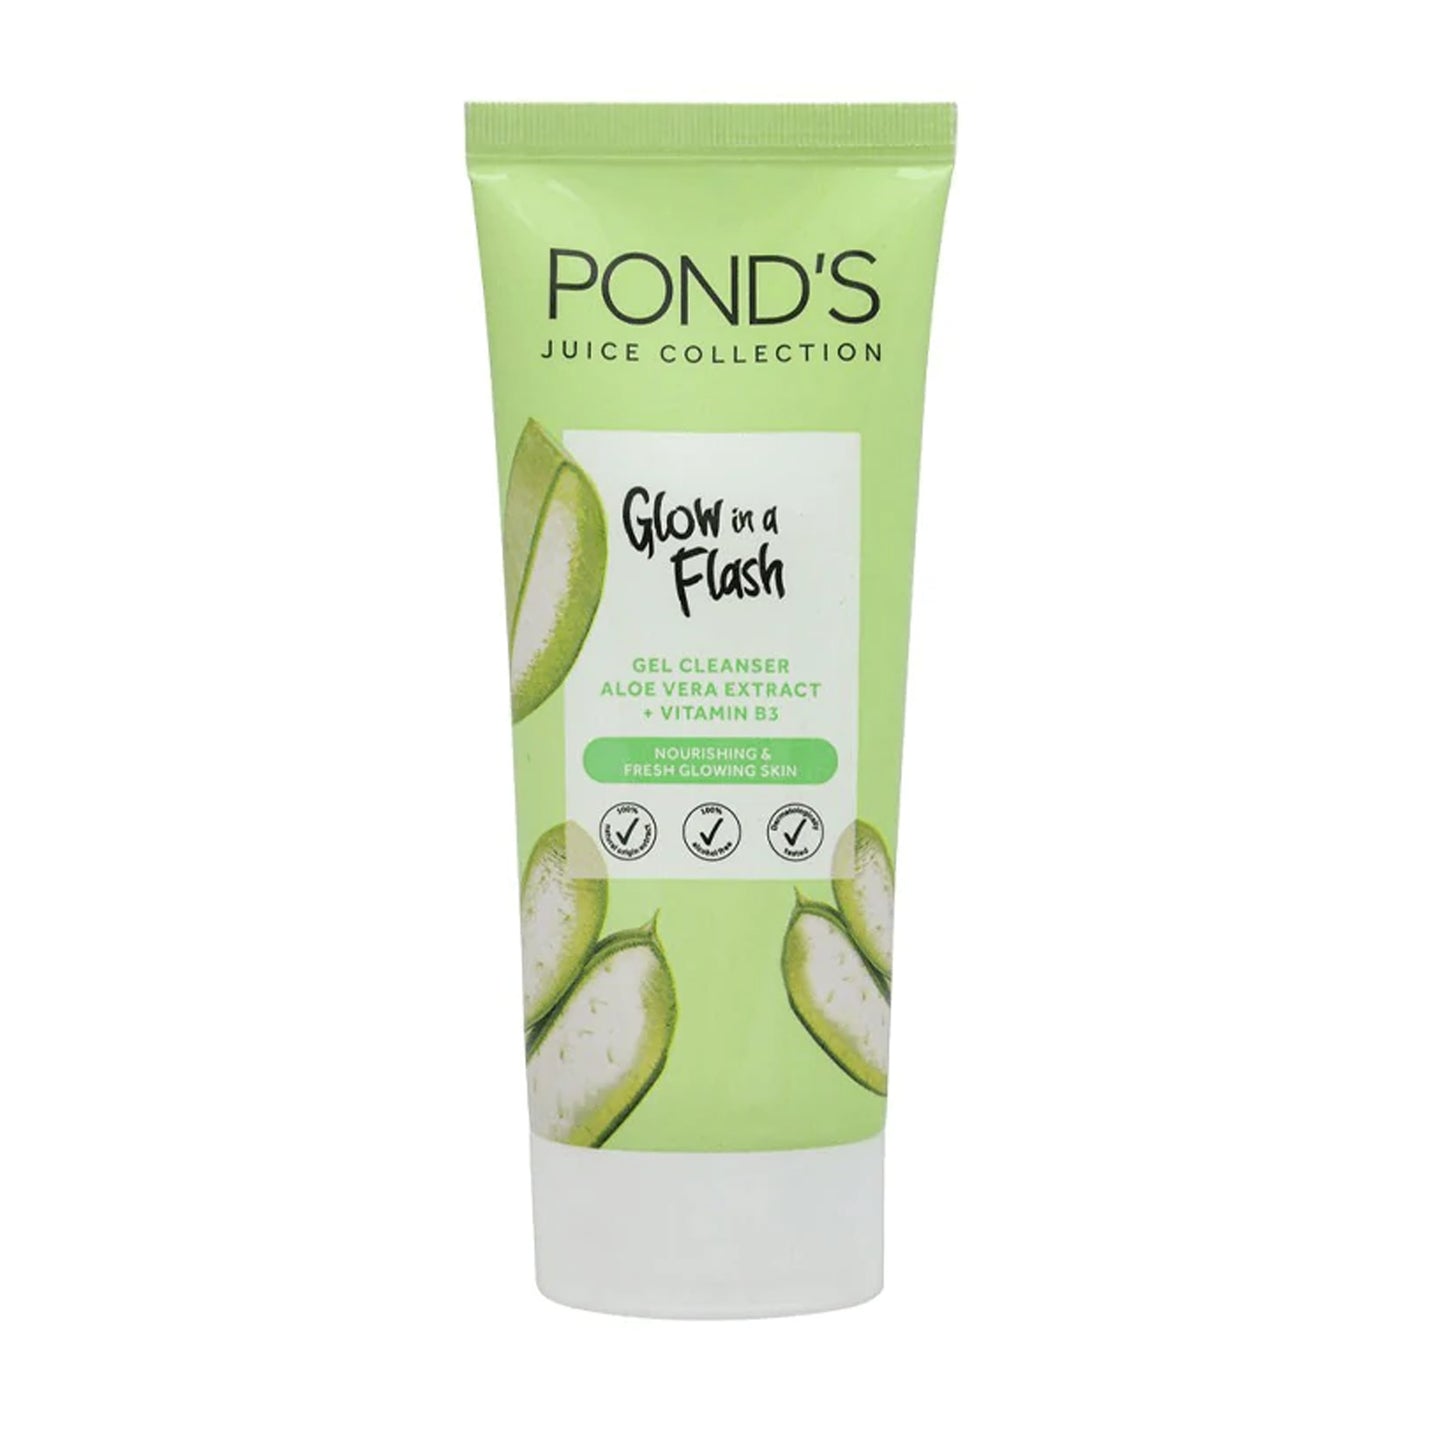 POND'S - JUICE COLLECTION GLOW IN A FLASH ALOE VERA EXTRACT+VITAMIN B3 GEL CLEANSER - 100ML